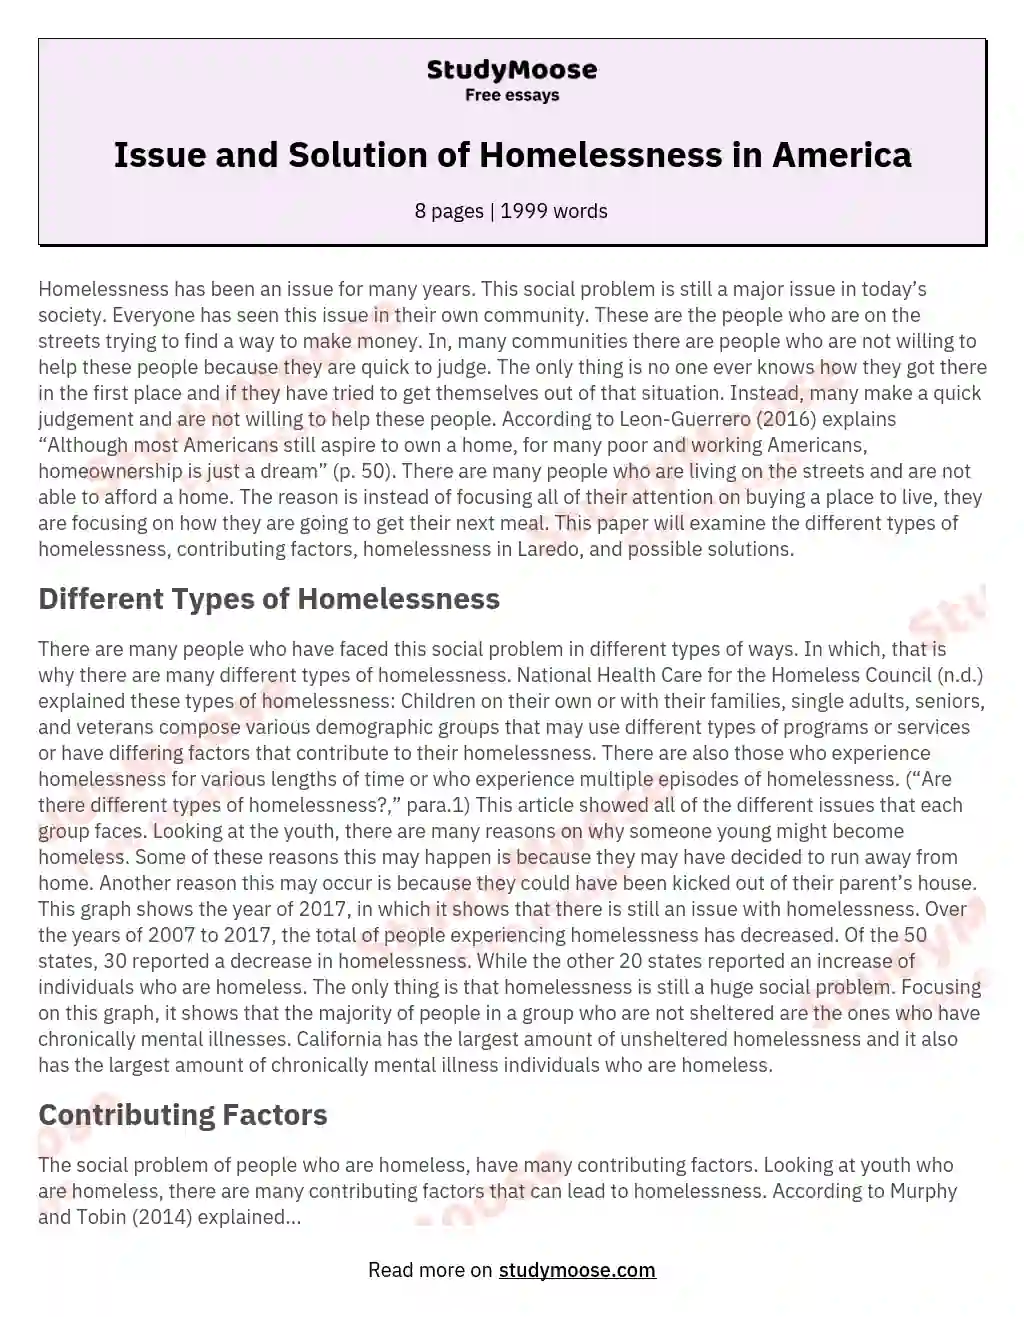 title for homelessness essay